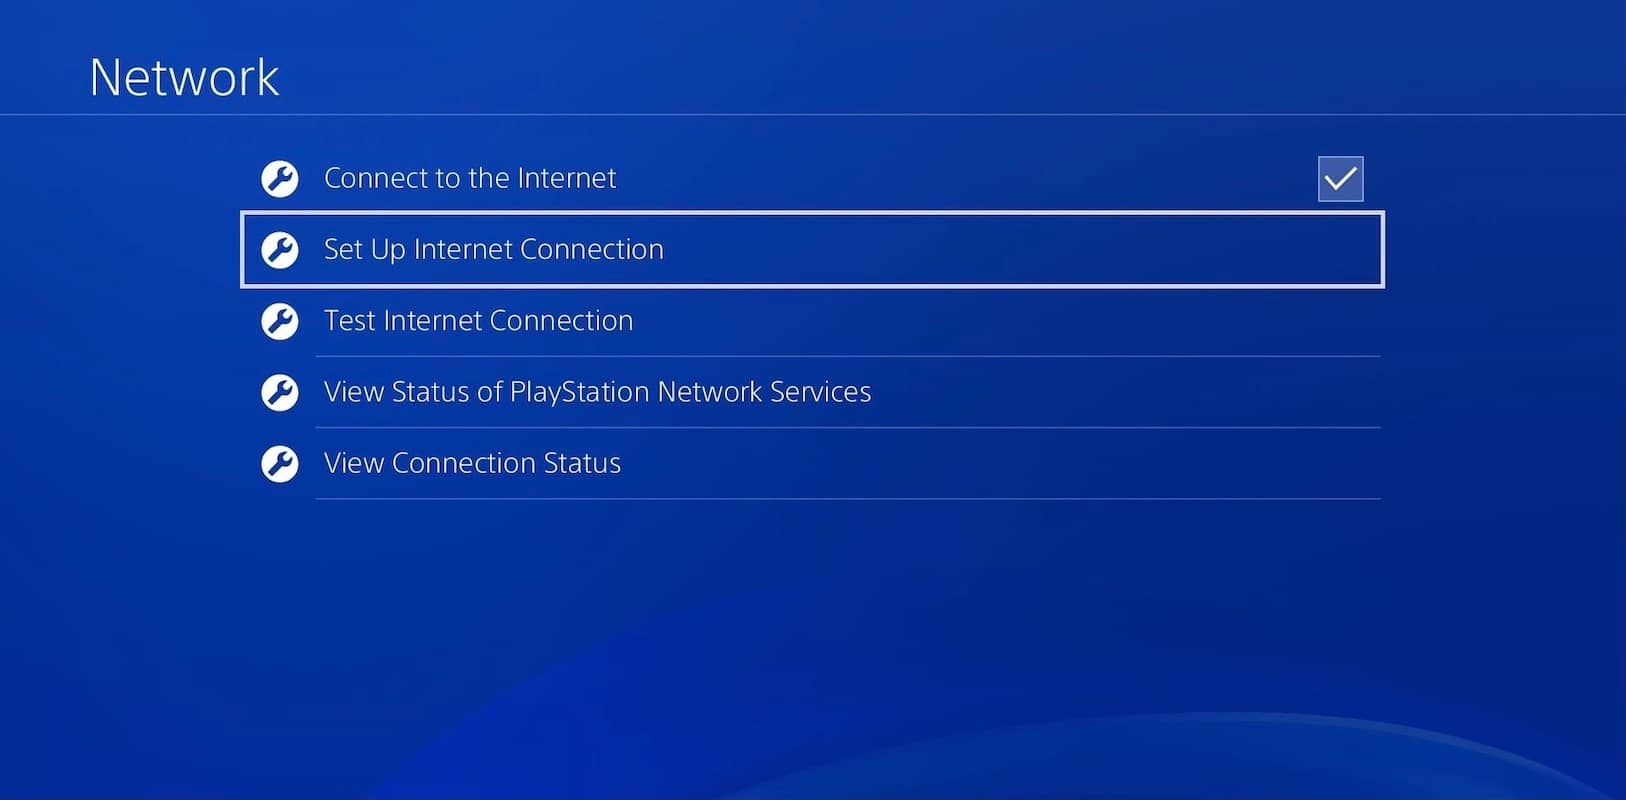 Network settings menu on the PlayStation 4